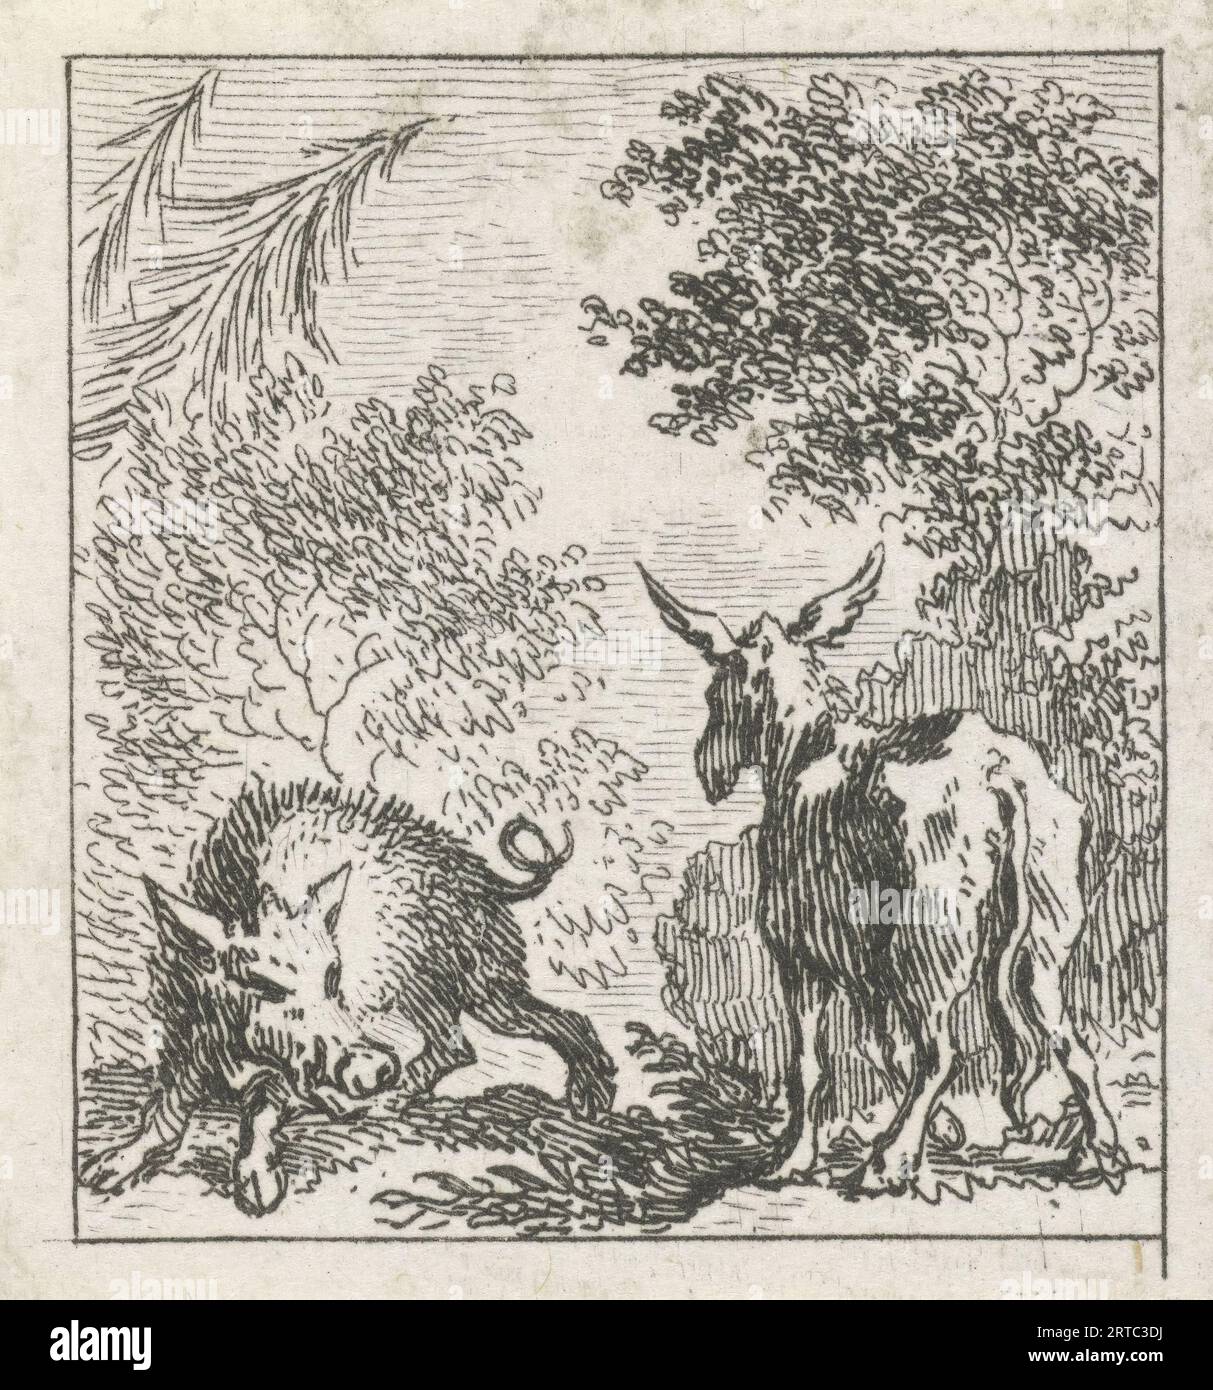 Fable of the donkey and the wild boar Illustrations for fable stories from Phaedrus (series title), A donkey and a wild boar are standing opposite each other in a forest. This illustration was made for the Aesopian fables of the Latin poet Phaedrus, Fables. Simon Fokke (1712-1784) was a Dutch designer, etcher, and engraver. Born in Amsterdam, The Netherlands. Discover the enchanting world of Phaedrus' fables, where timeless wisdom meets captivating storytelling. In 'The Fables of Phaedrus,' you'll embark on a journey through the vivid landscapes of ancient Rome Stock Photo